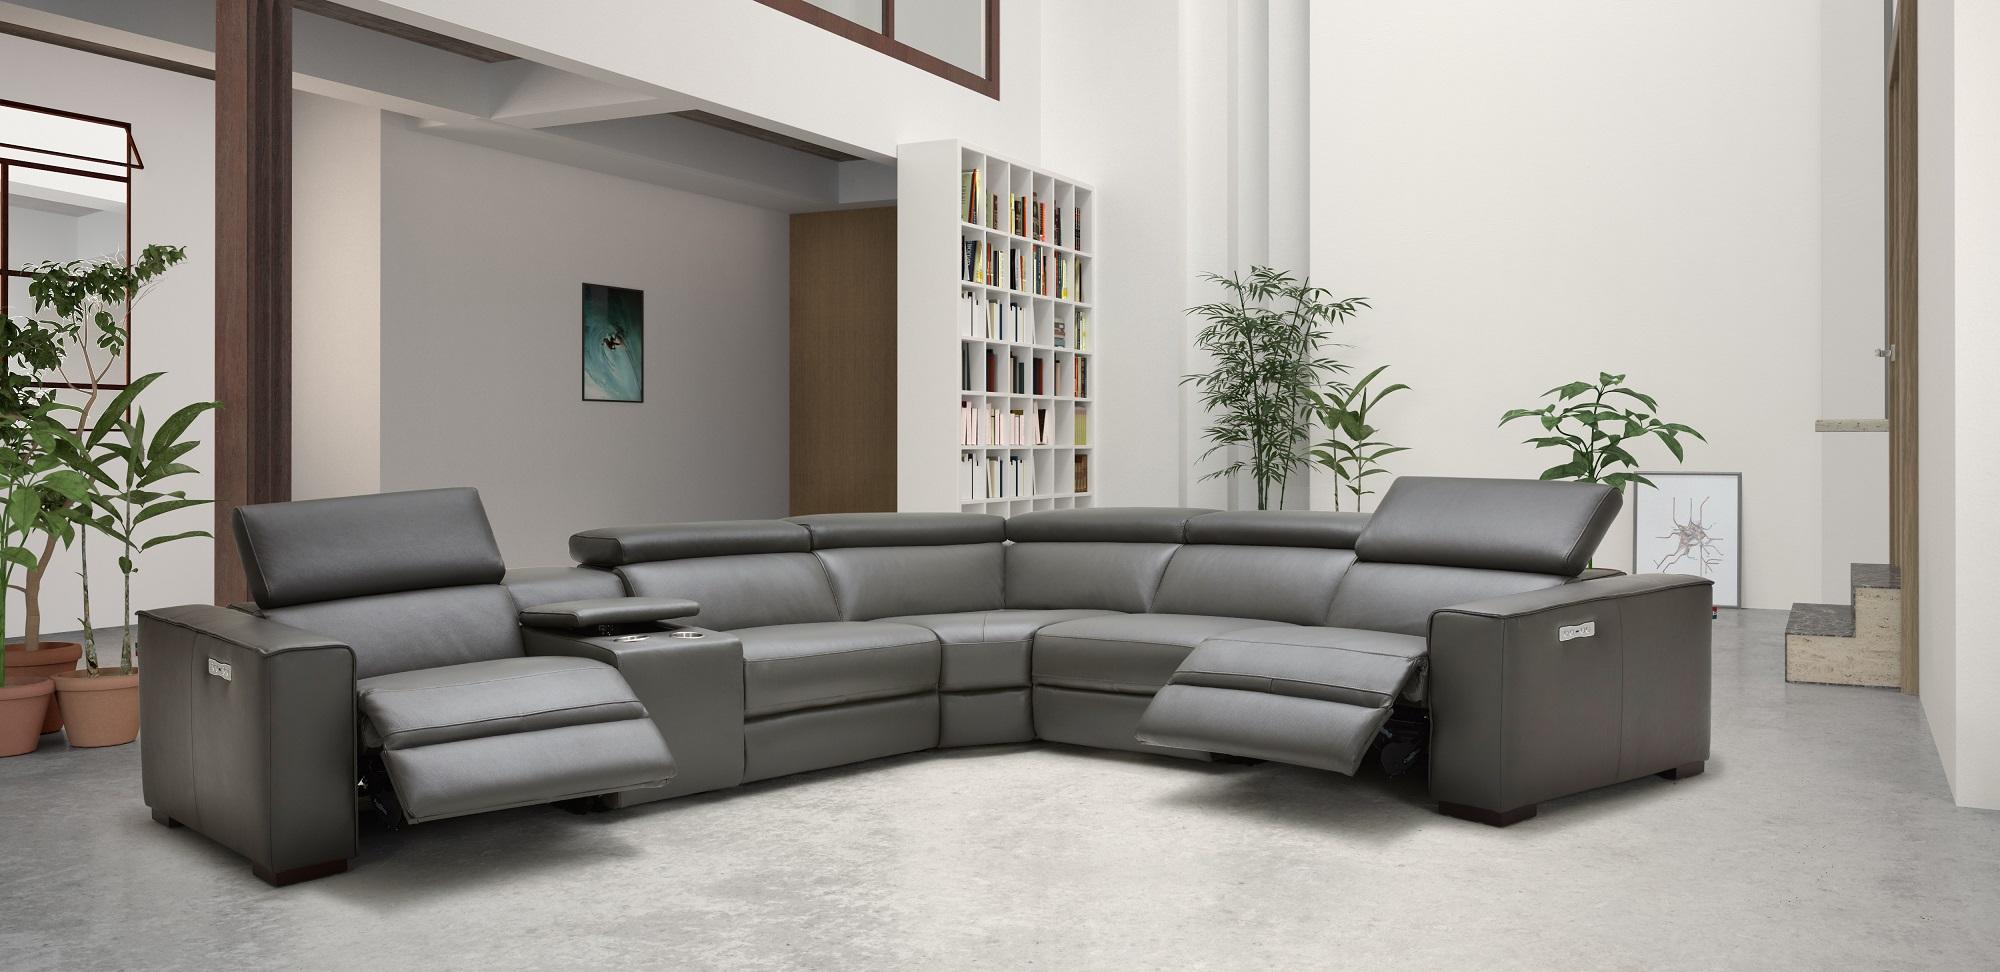 Contemporary Reclining Sectional Picasso SKU18865-DG in Dark Gray Top grain leather